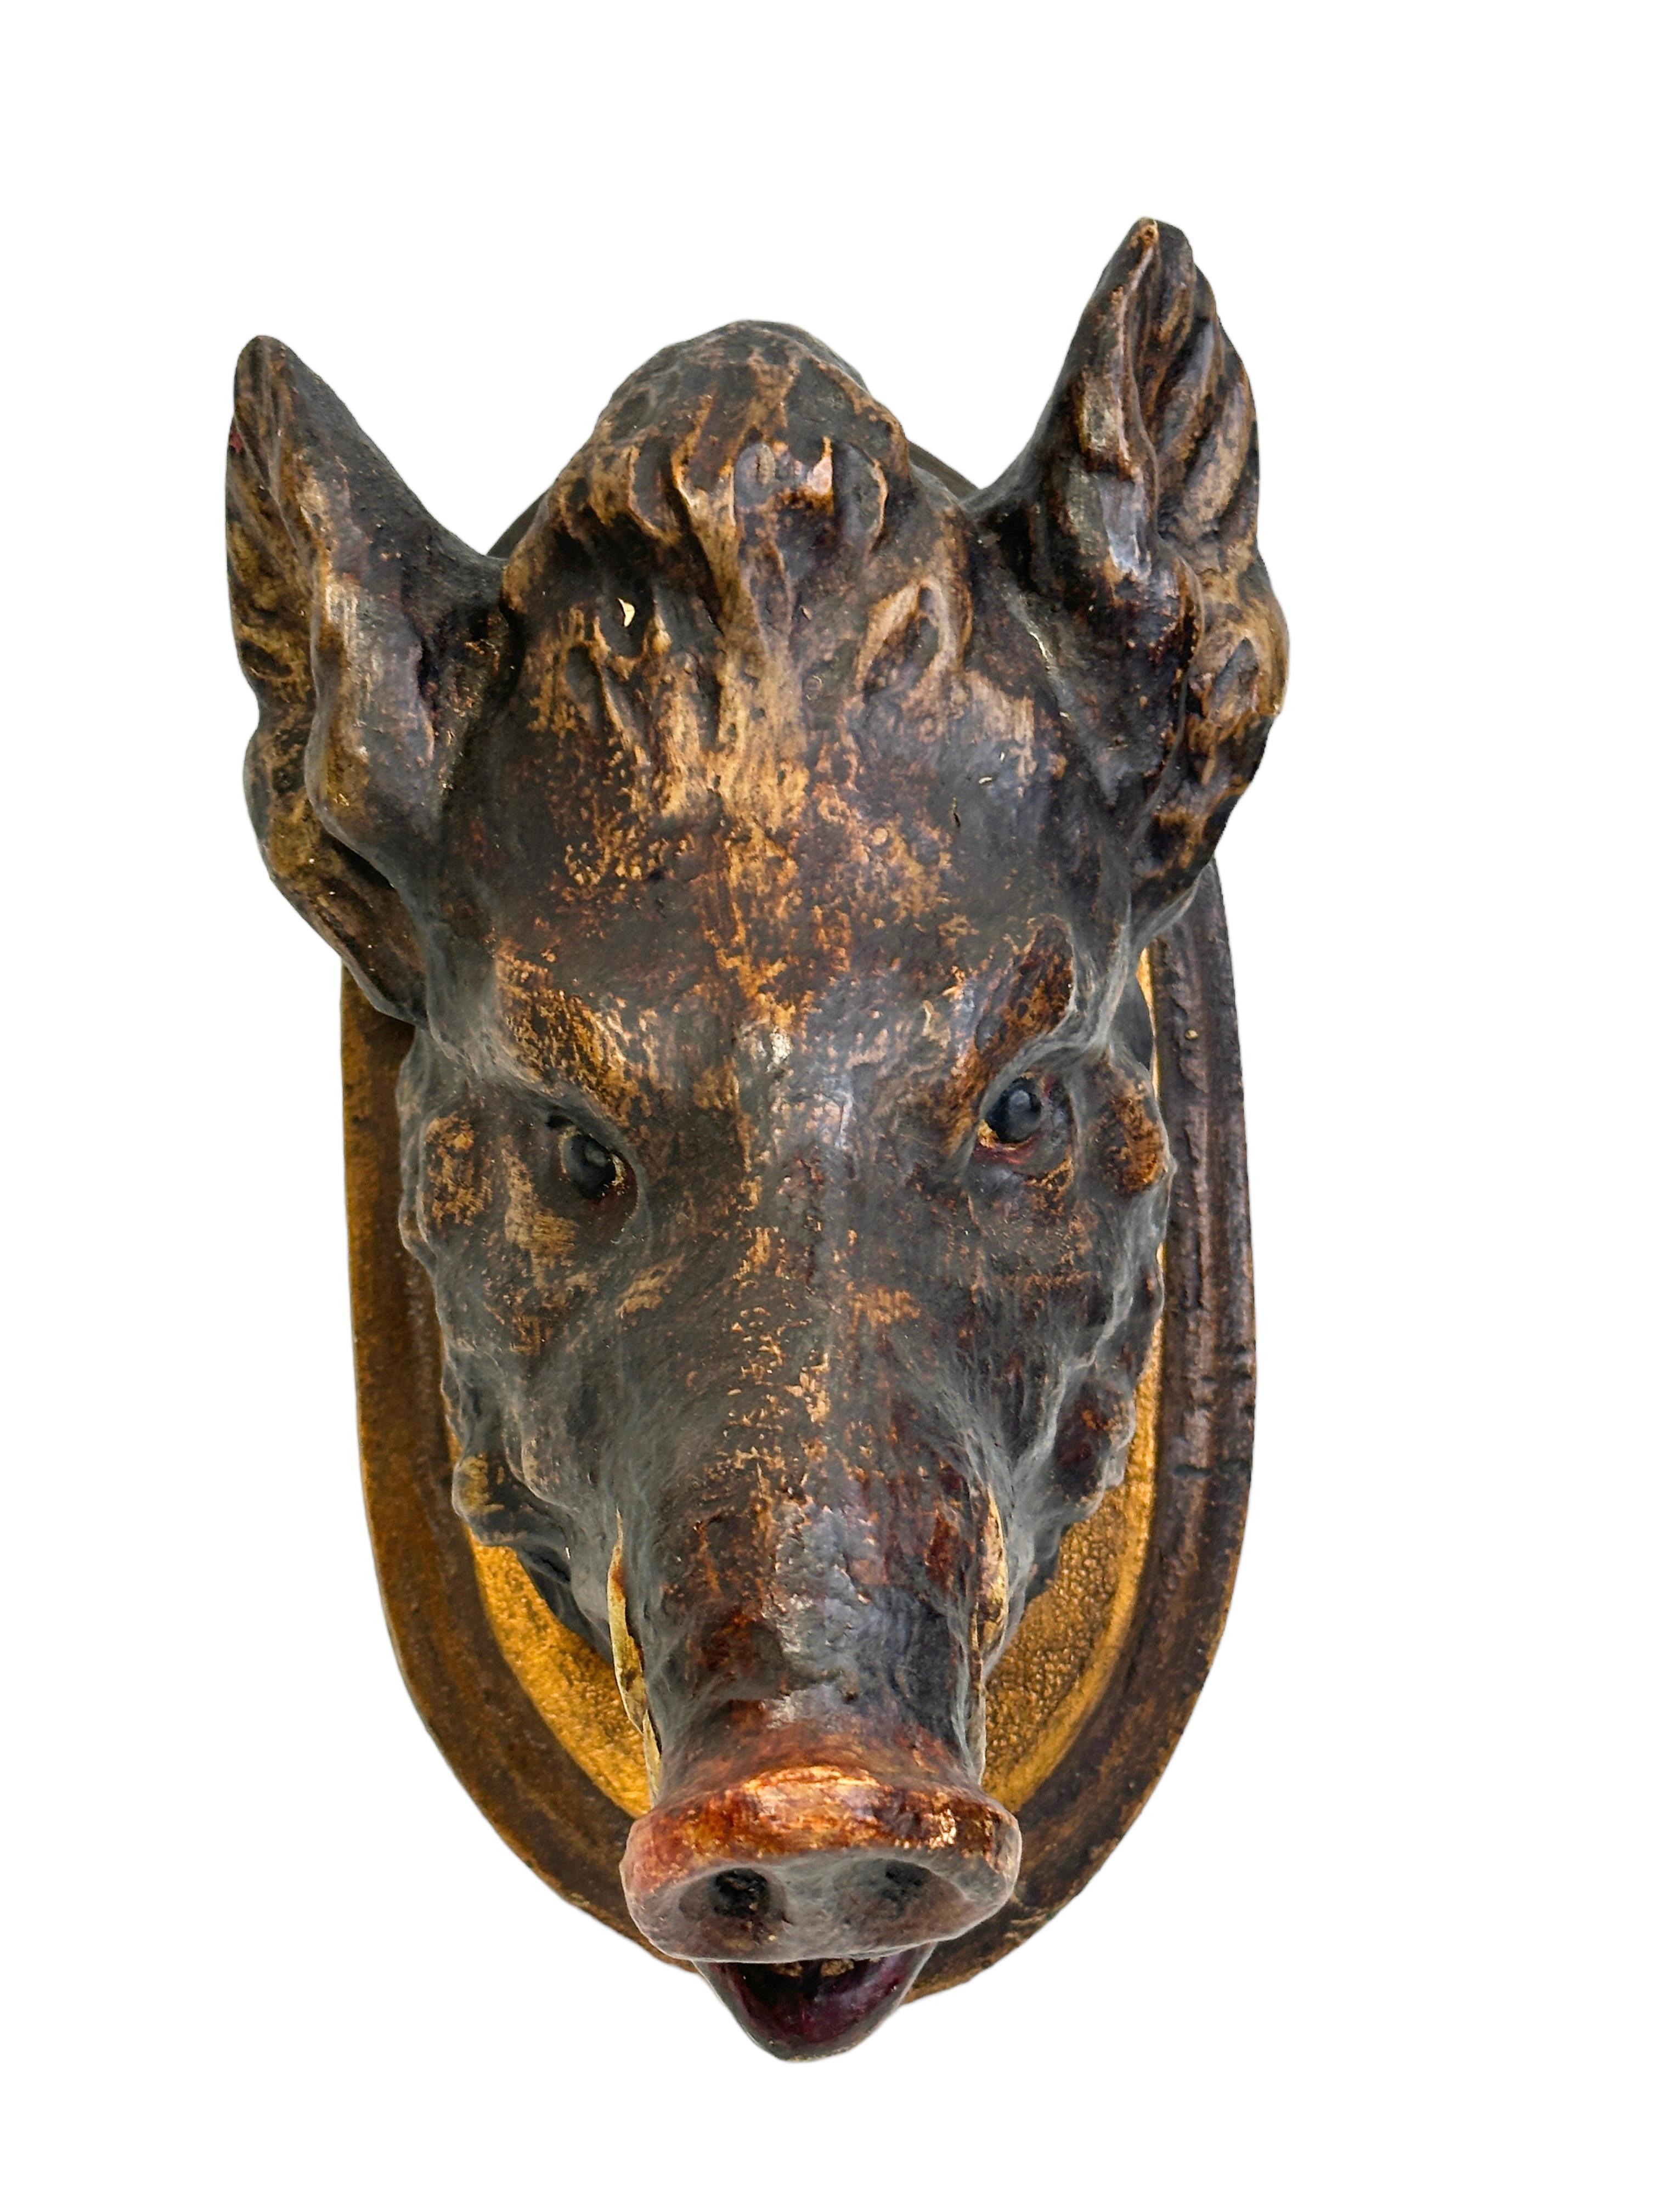 A great looking hand carved original wooden Folk Art Wild Boar head wall decoration. A great piece for a suitable ambiance in a trophy room or the office of a Hunter or Woodsman. More than likely one of the Folk Art items made between 1860 and the